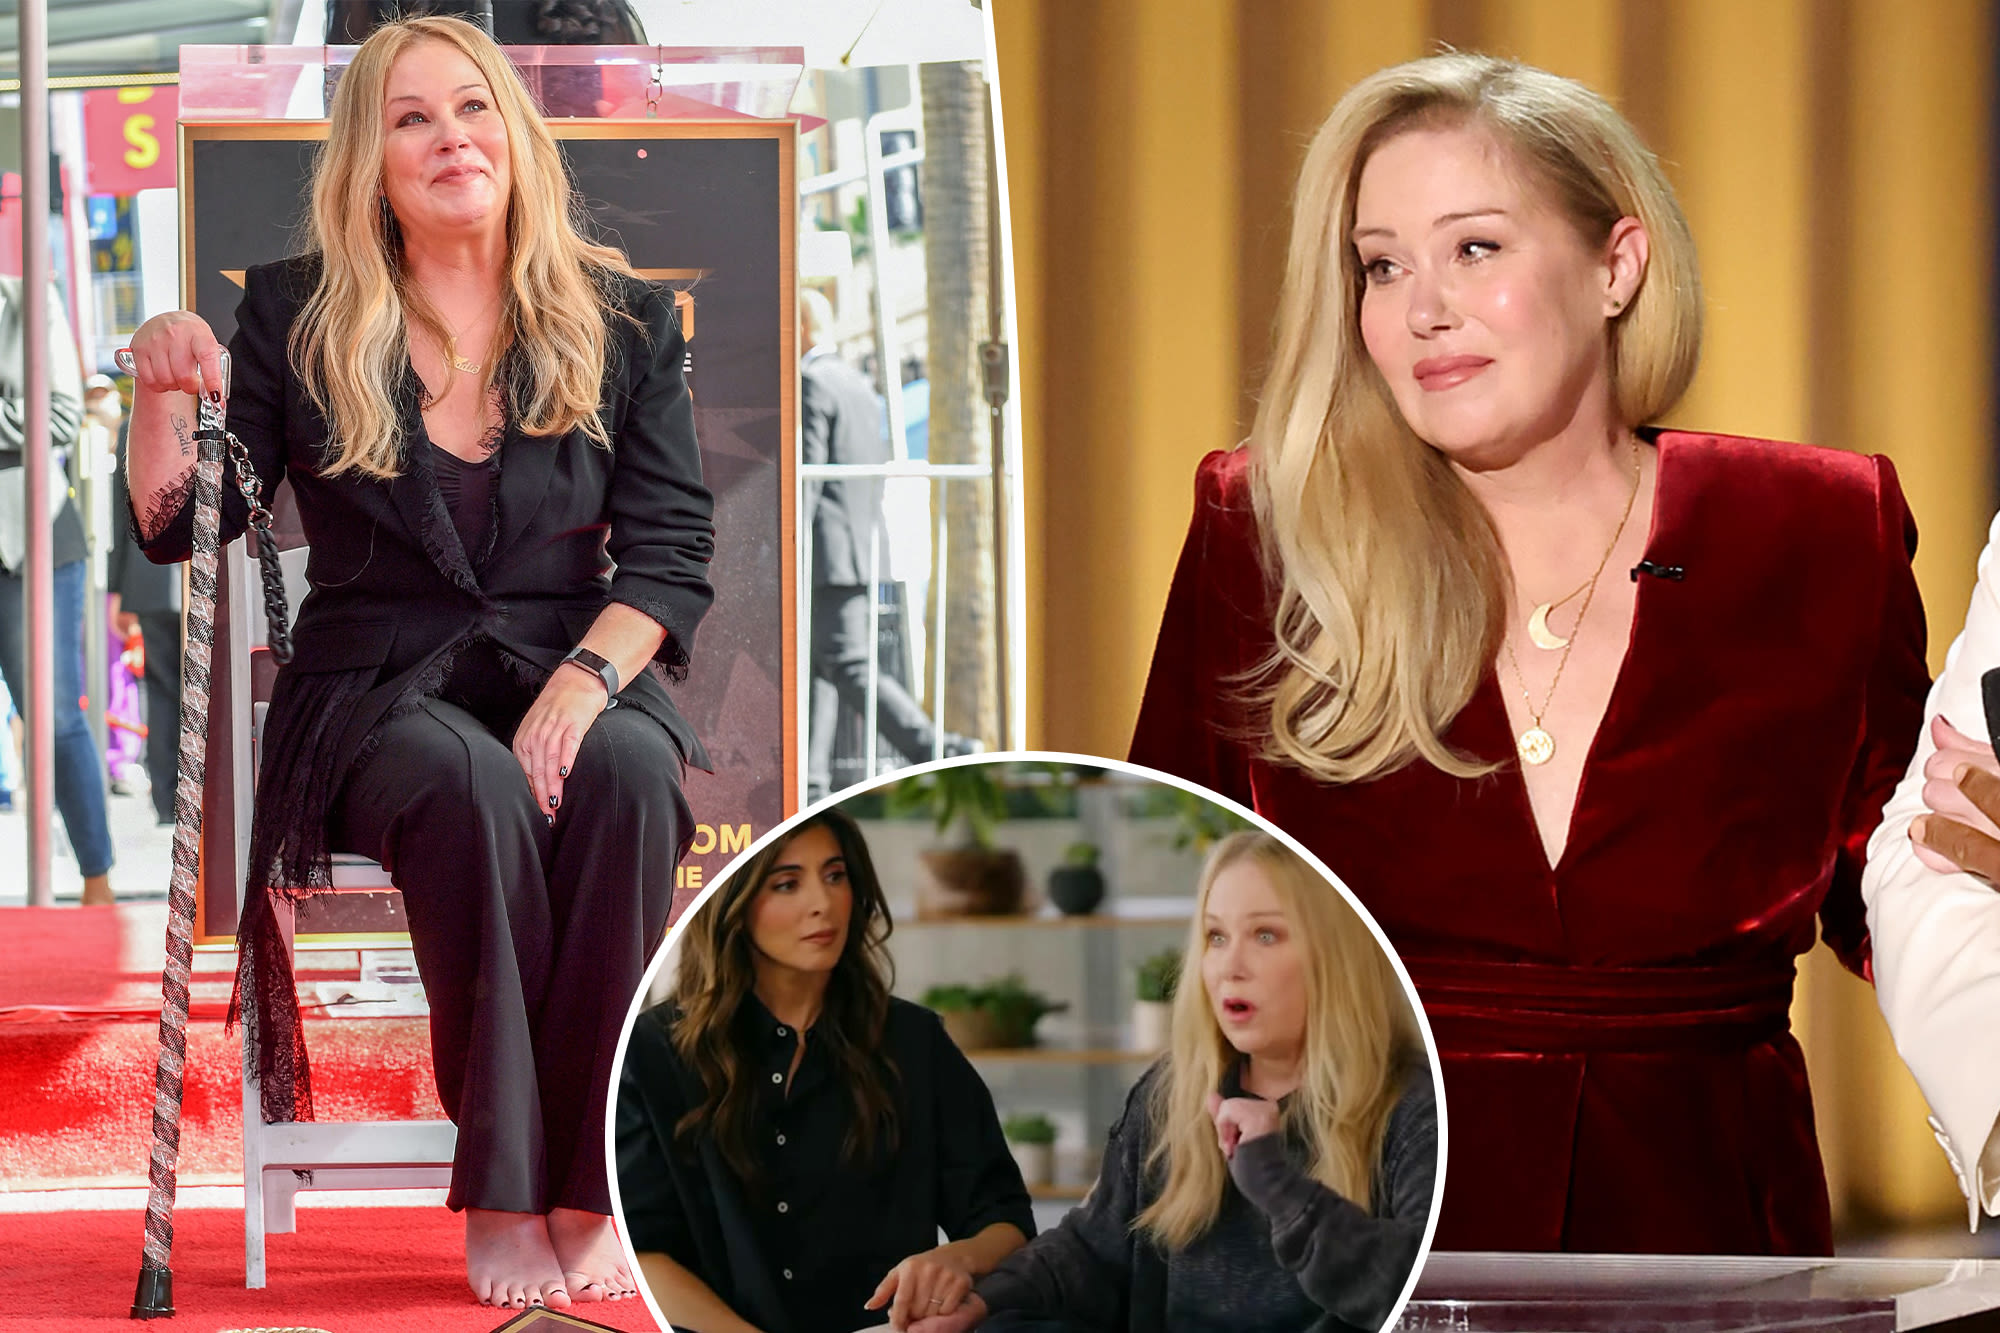 Christina Applegate says she doesn’t ‘enjoy living’ anymore after MS diagnosis: ‘I’m trapped in this darkness’